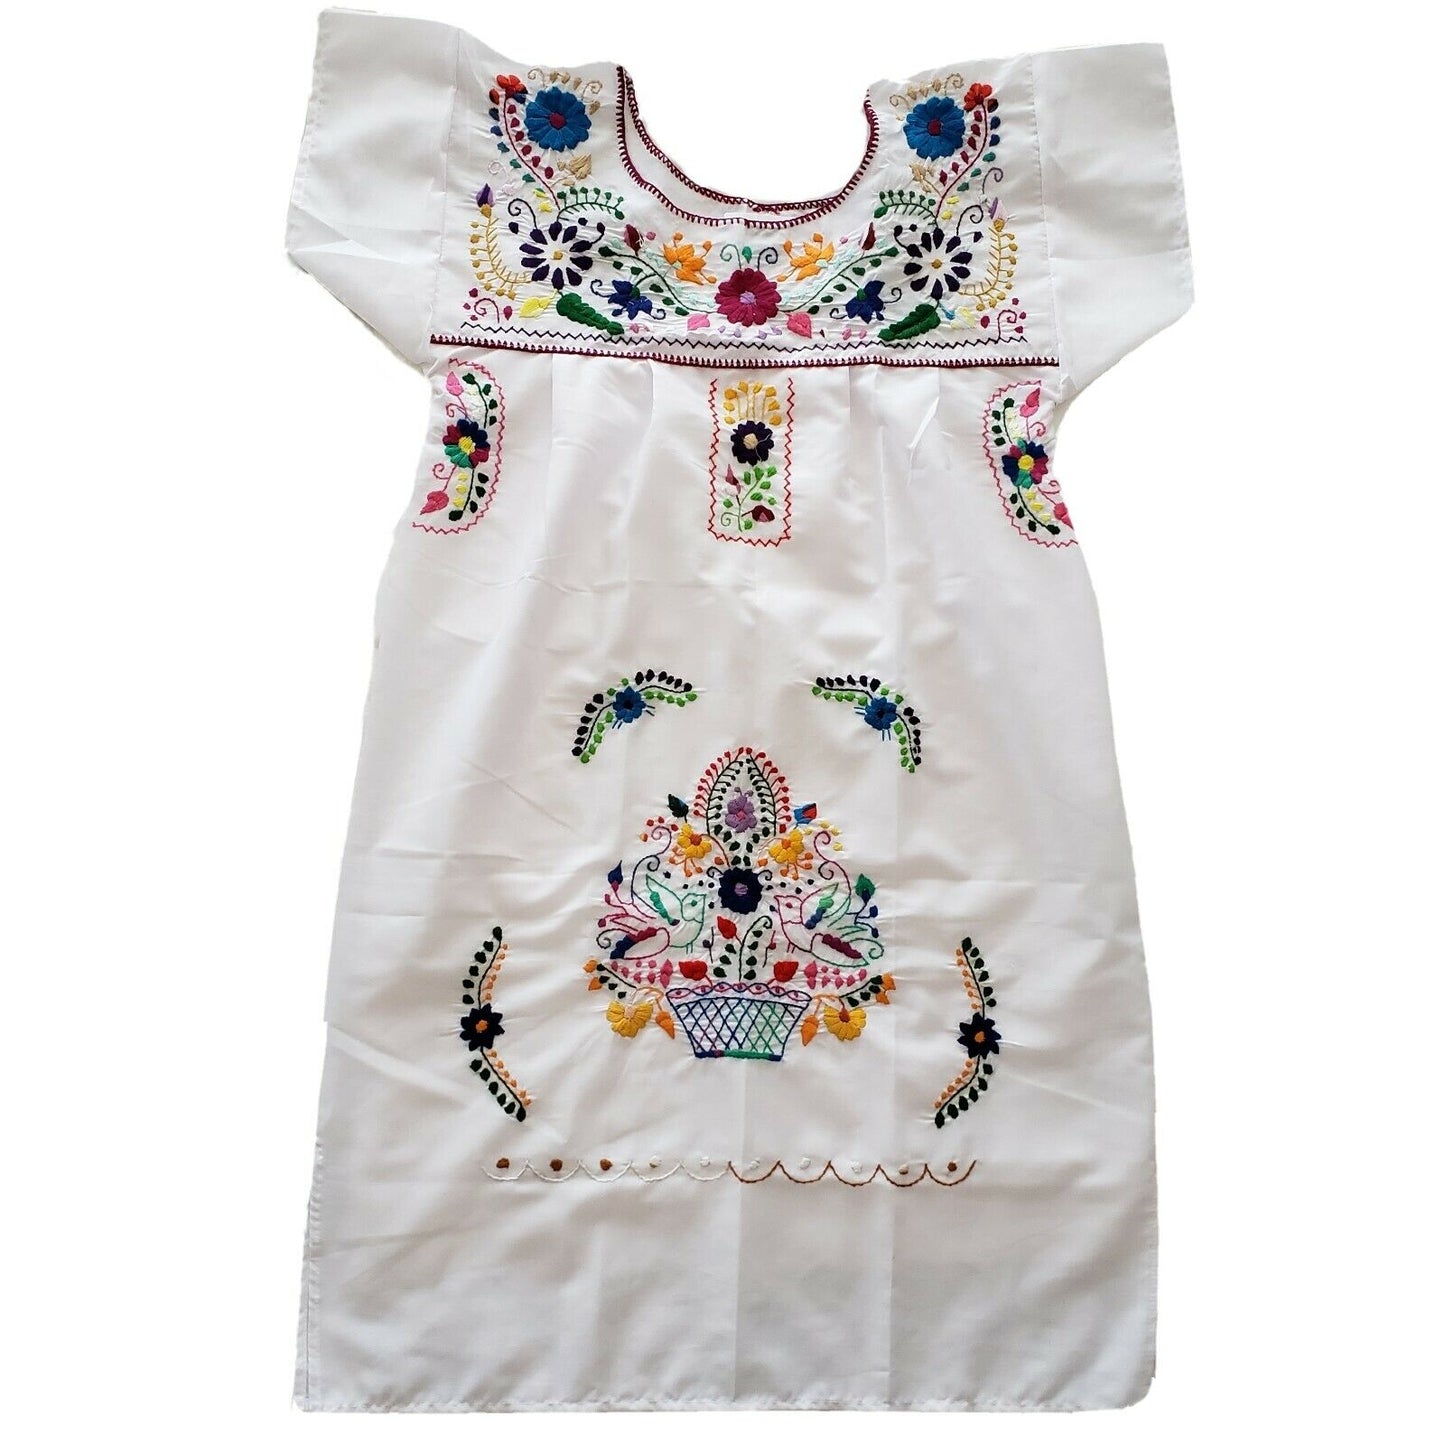 Peasant Hand Embroidered Floral Mexican Dress - The Little Pueblo